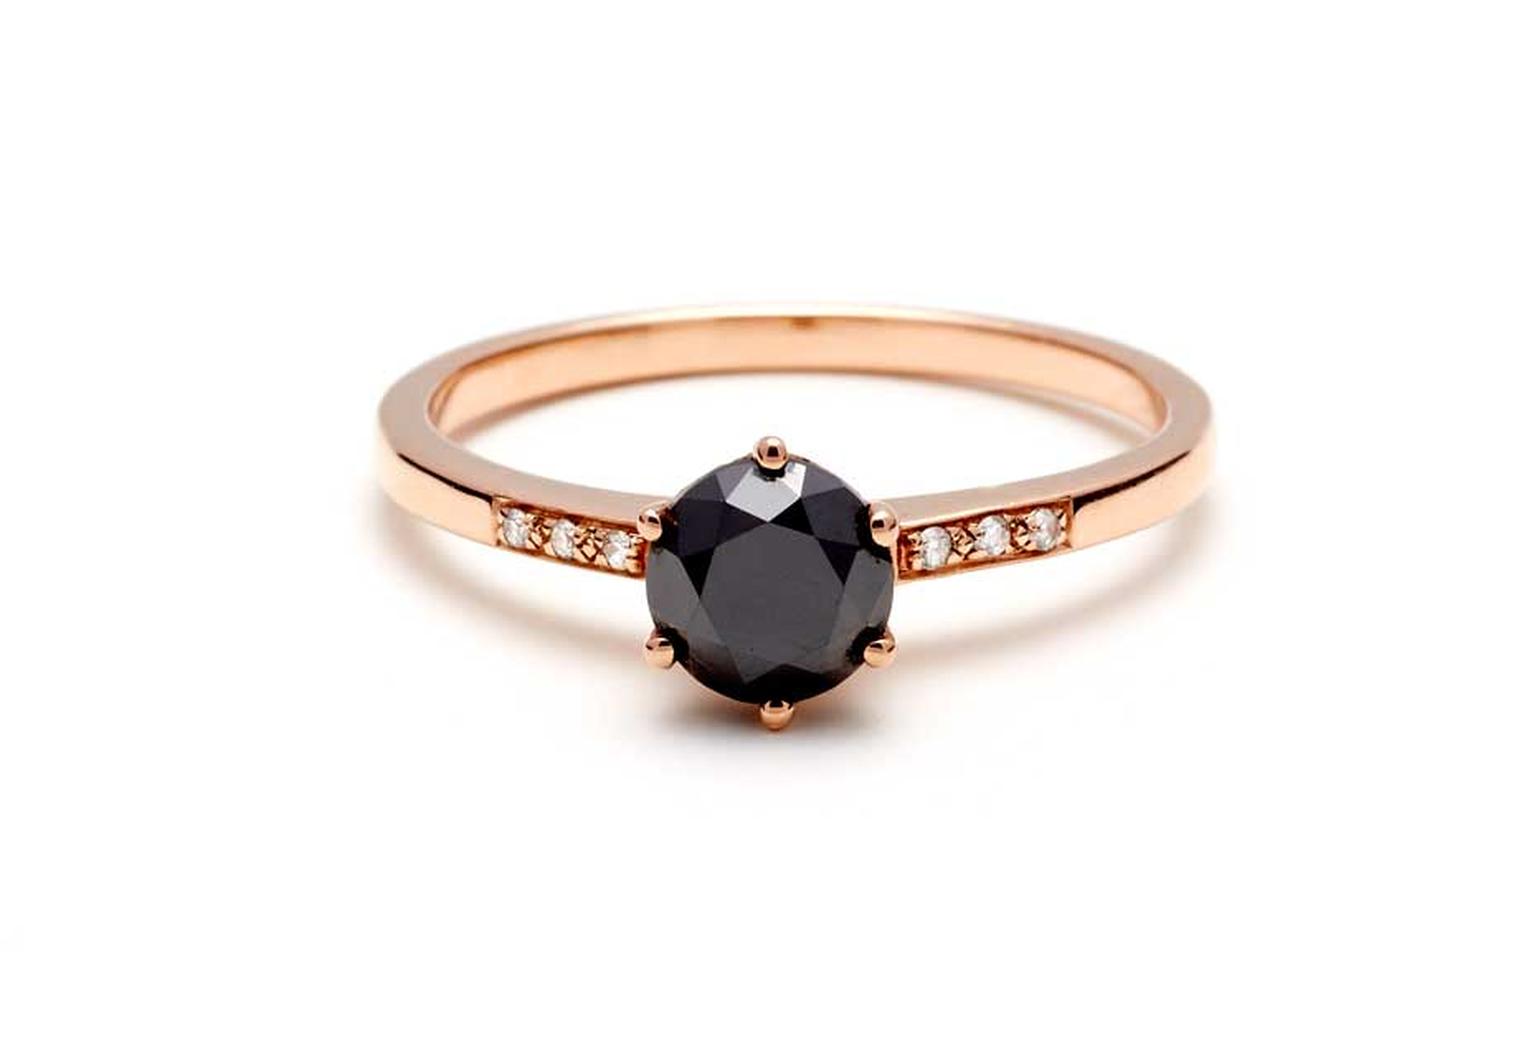 Rose gold engagement rings: the trend for flattering pink gold is here to stay